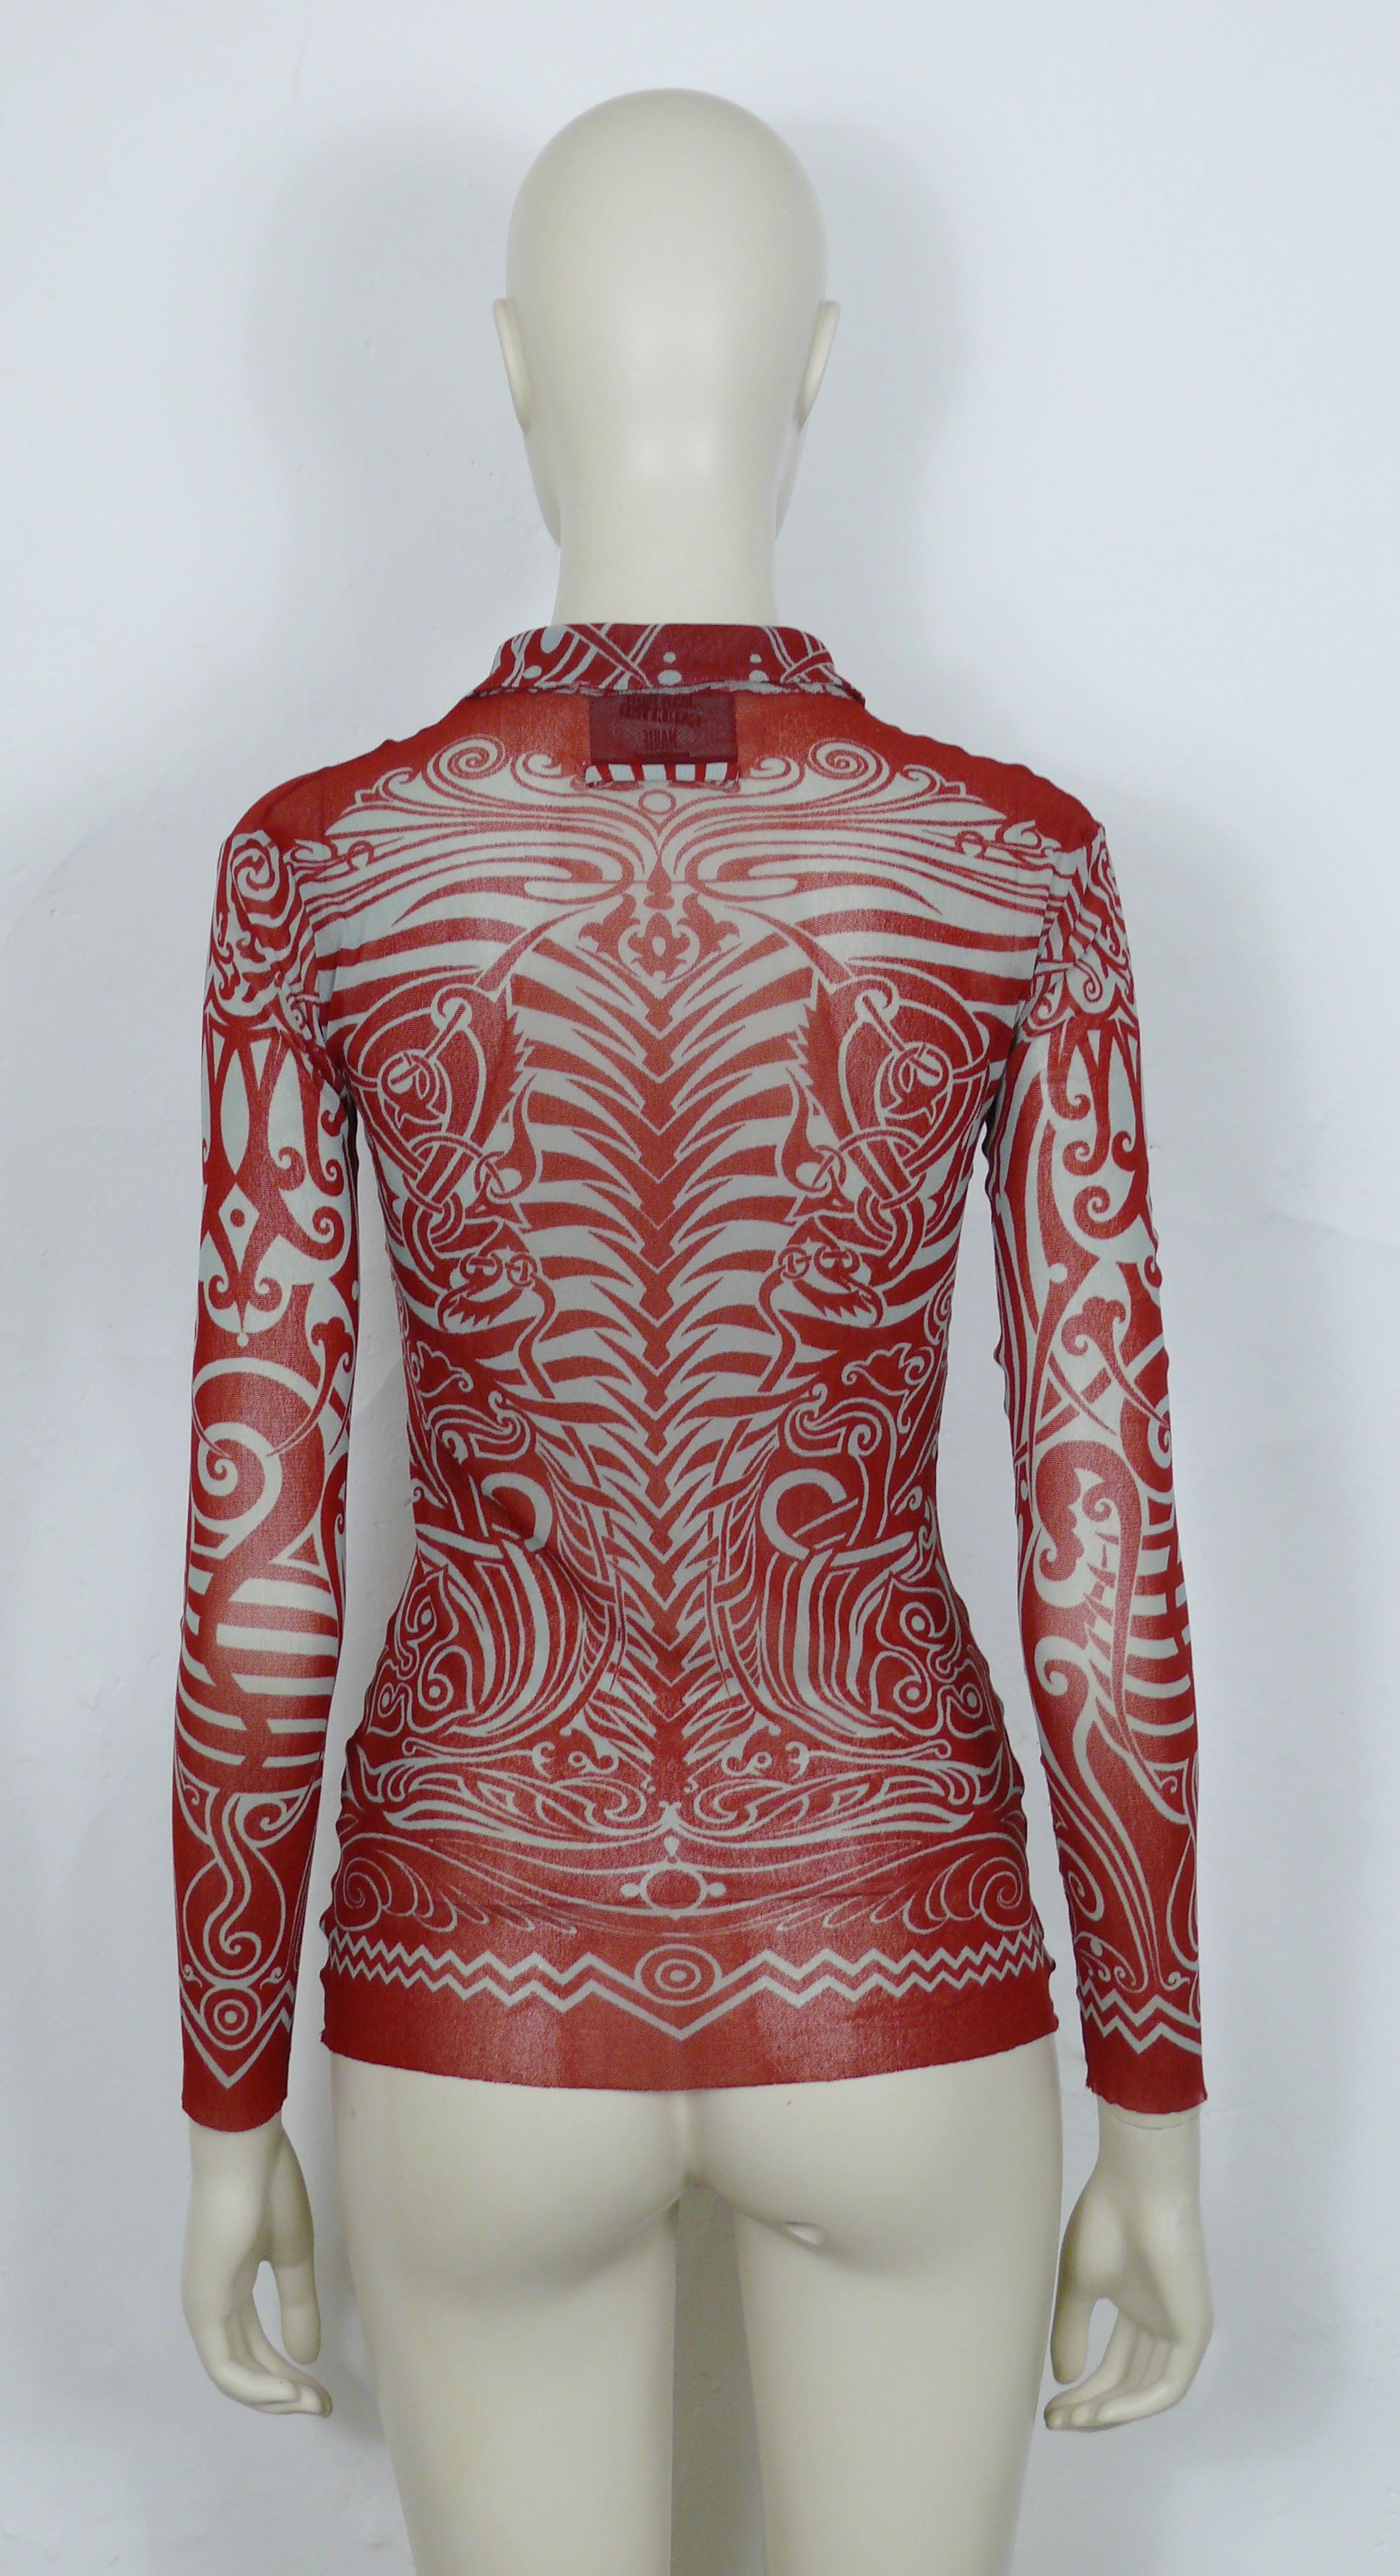 Jean Paul Gaultier Vintage 1996 Iconic Tribal Tattoo Print Mesh Shirt For Sale 1